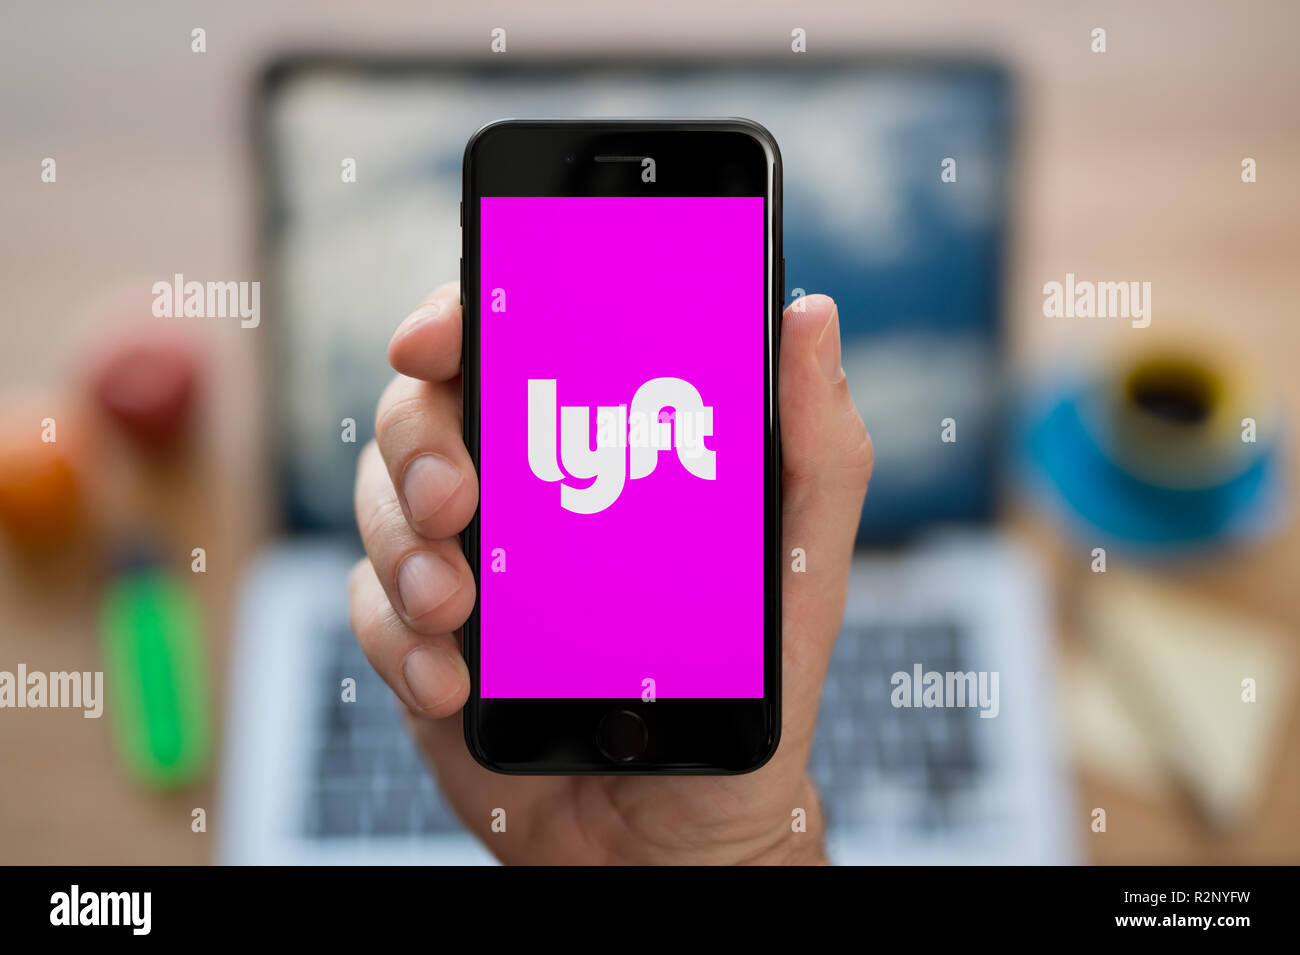 A man looks at his iPhone which displays the Lyft logo, while sat at his computer desk (Editorial use only). Stock Photo